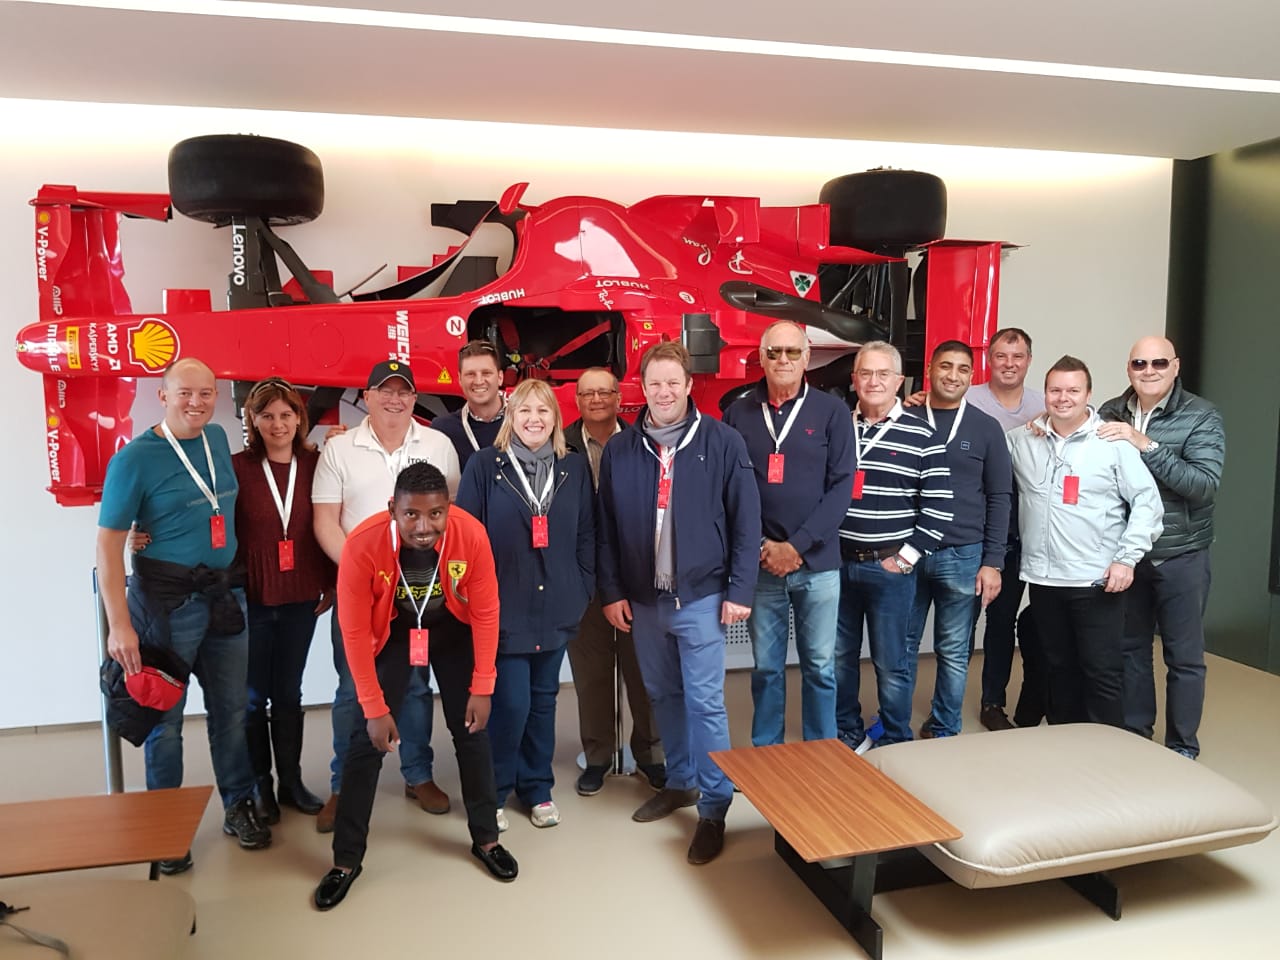 Slow food, fast cars - Review of Discover Ferrari & Pavarotti Land